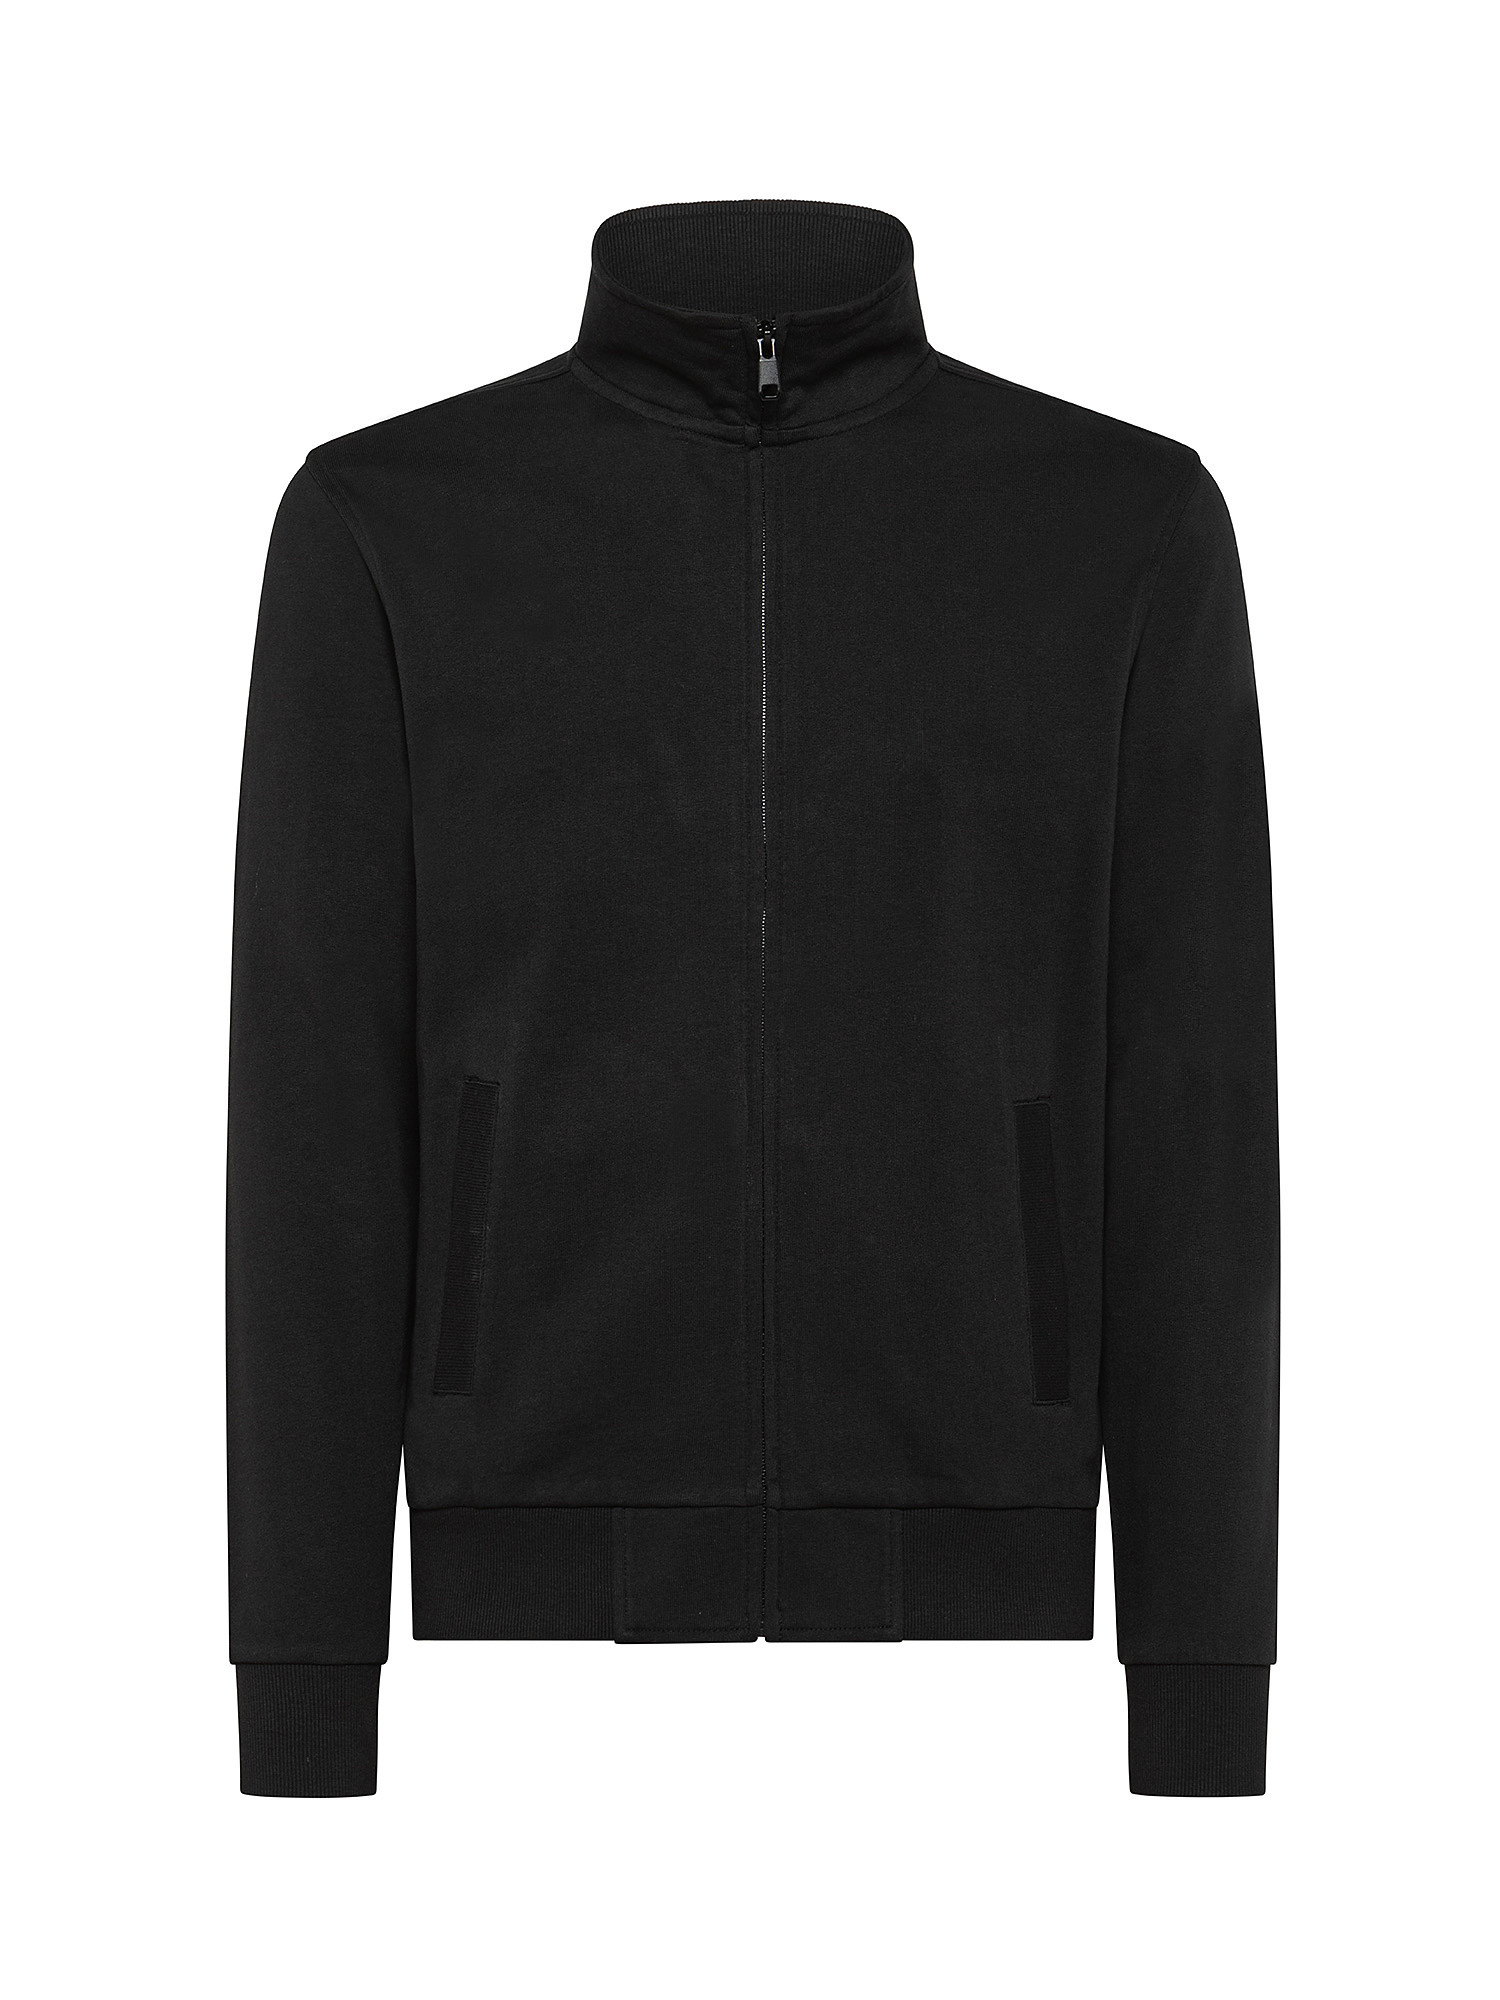 Sweatshirt with zip, Anthracite, large image number 0